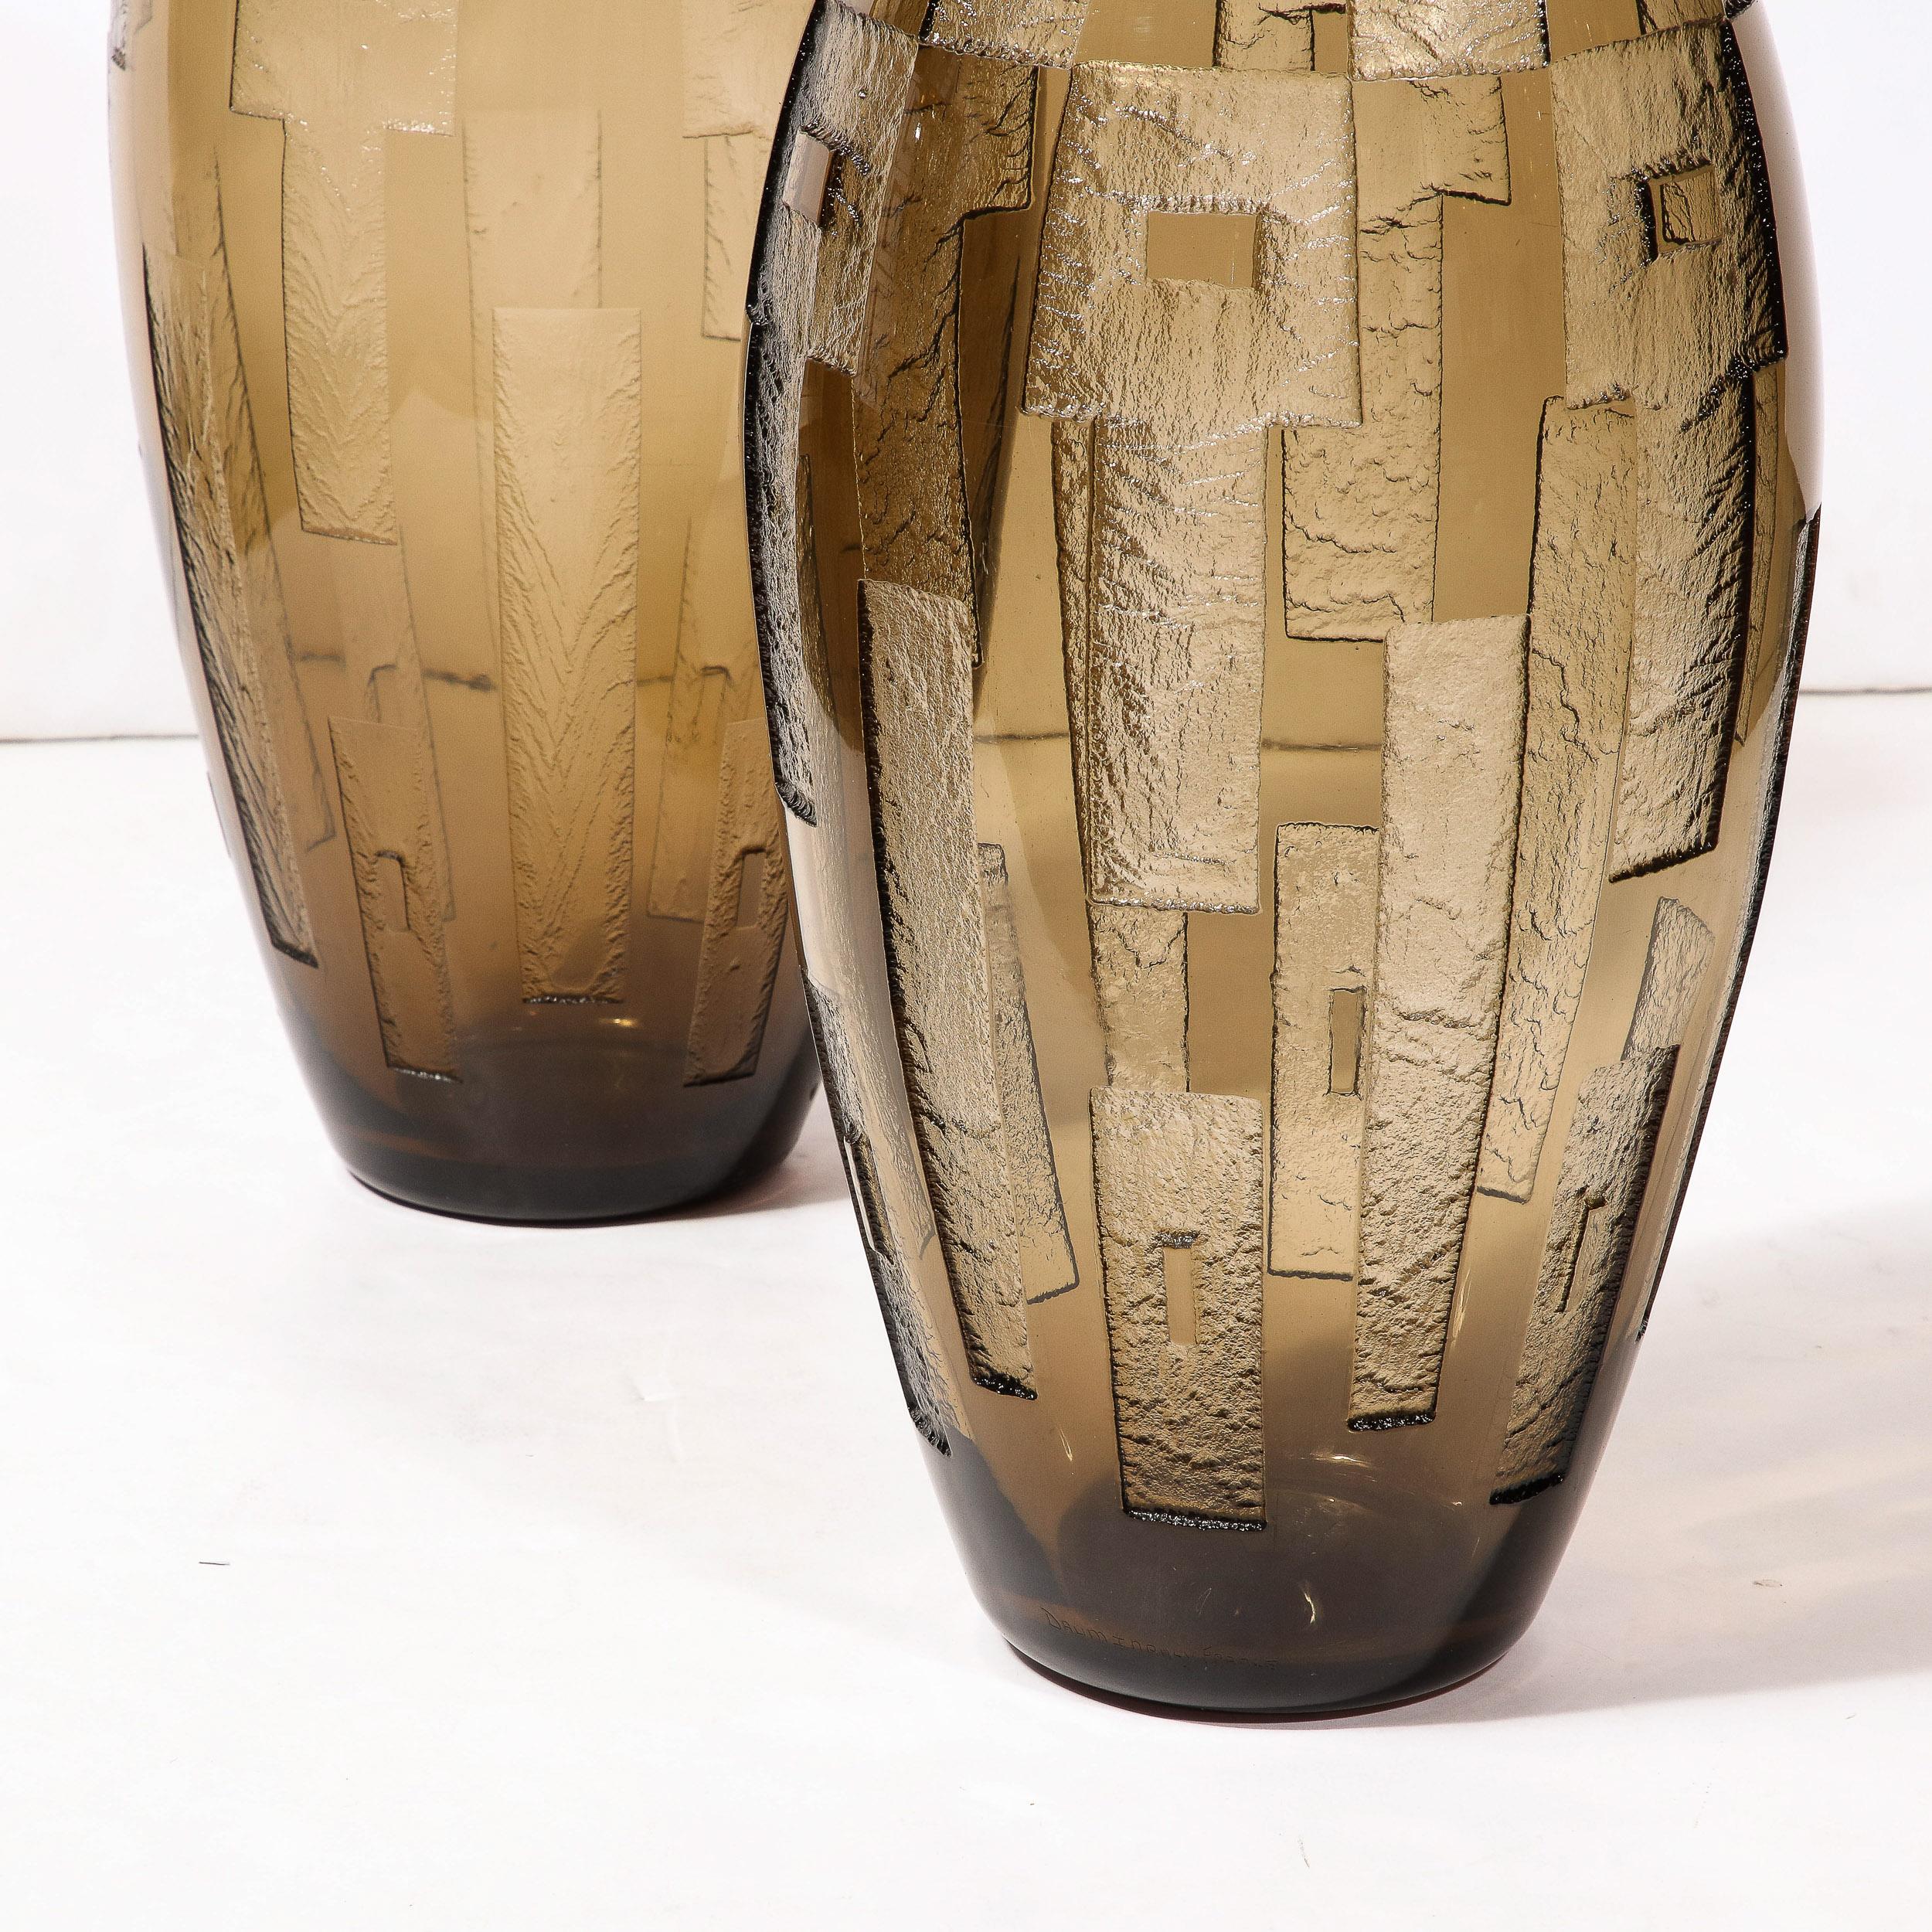 Pair of Art Deco Totem Form Vases in Acid Etched Smoked Geometric Glass by Daum For Sale 12